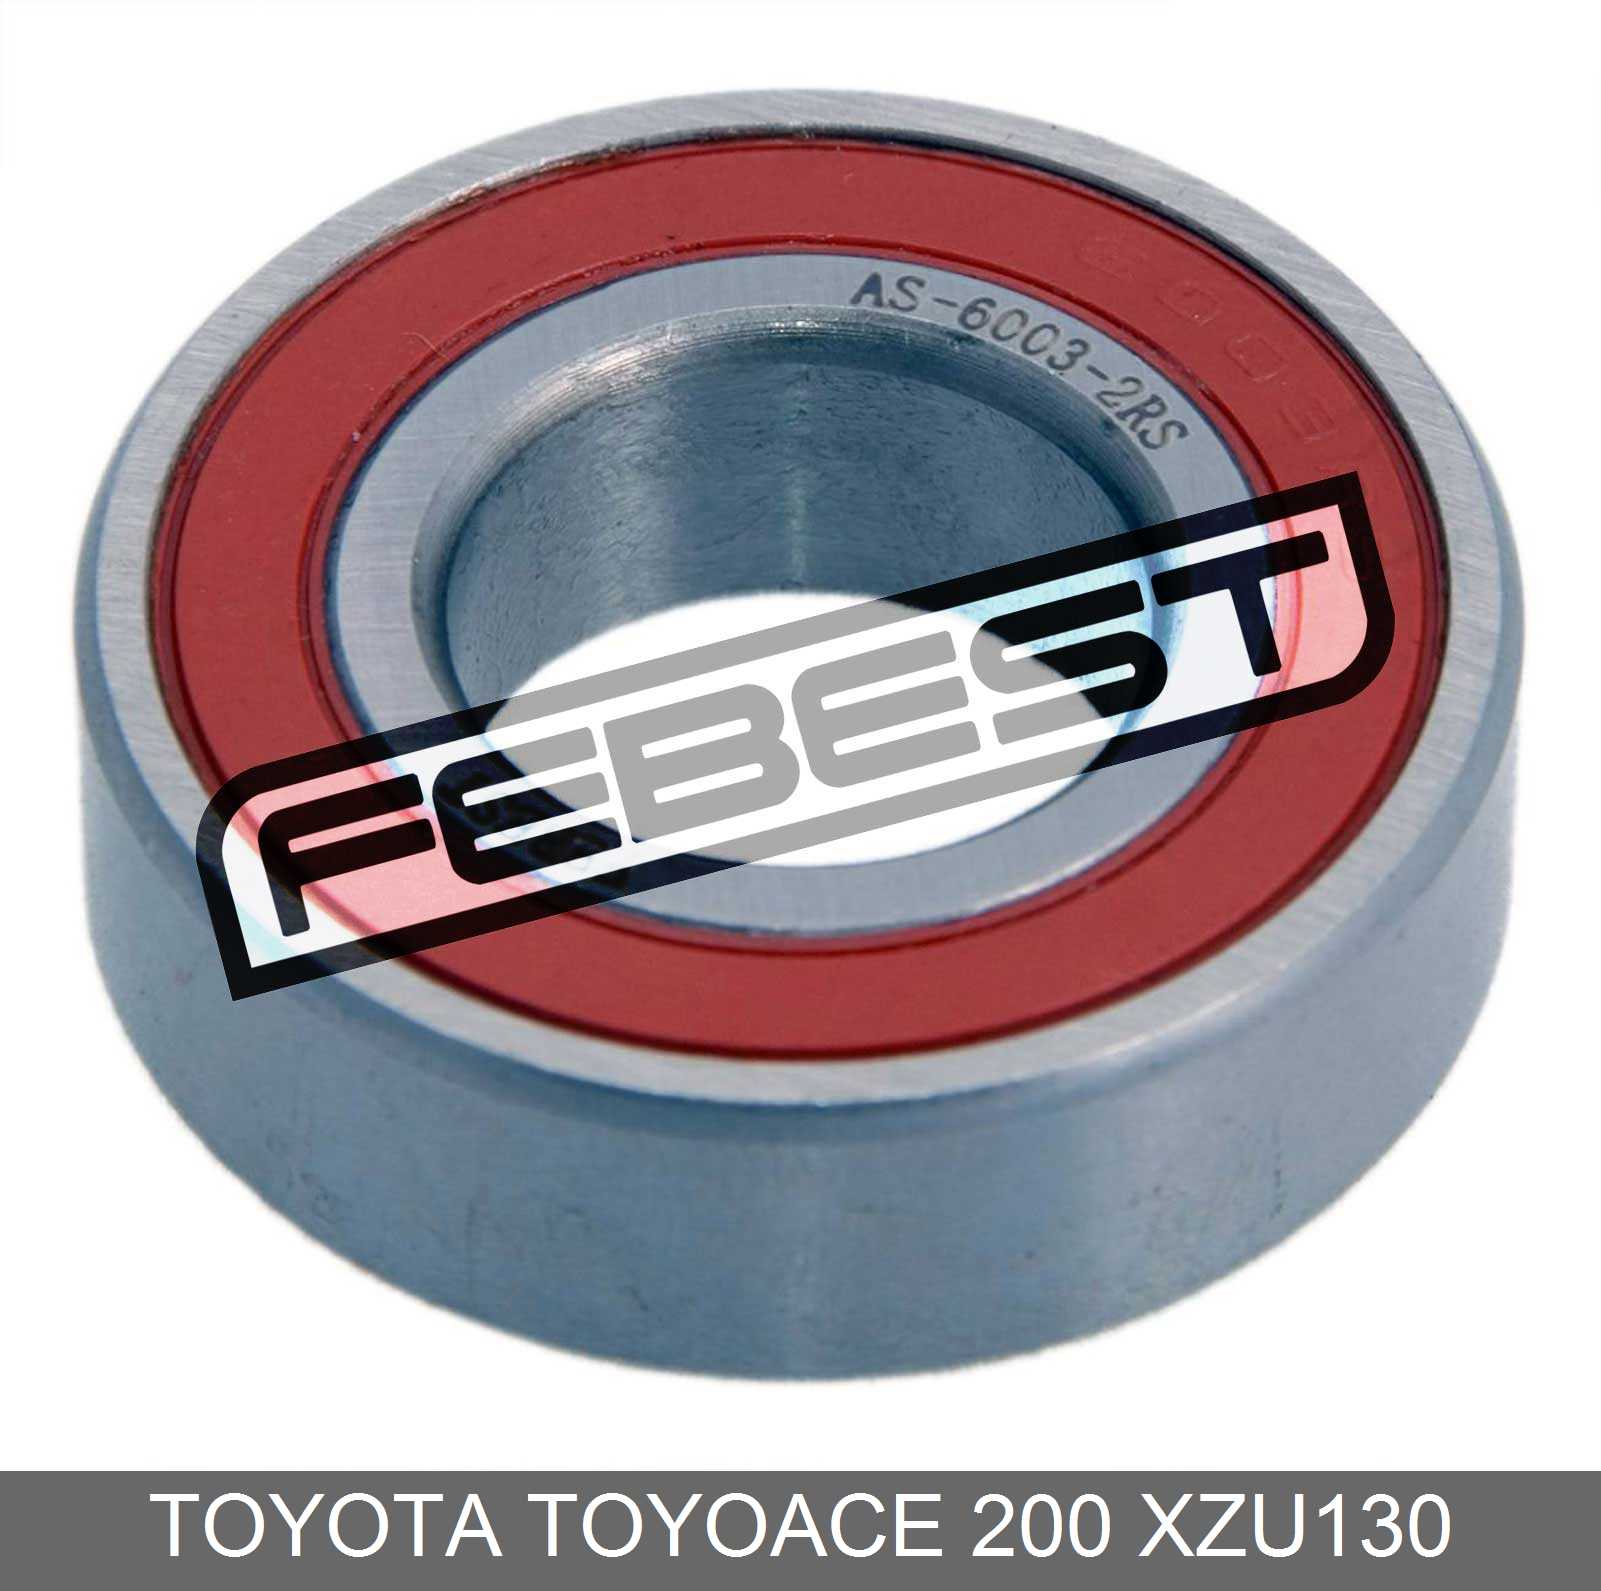 TOYOTA AS-6003-2RS_FAX Product Photo